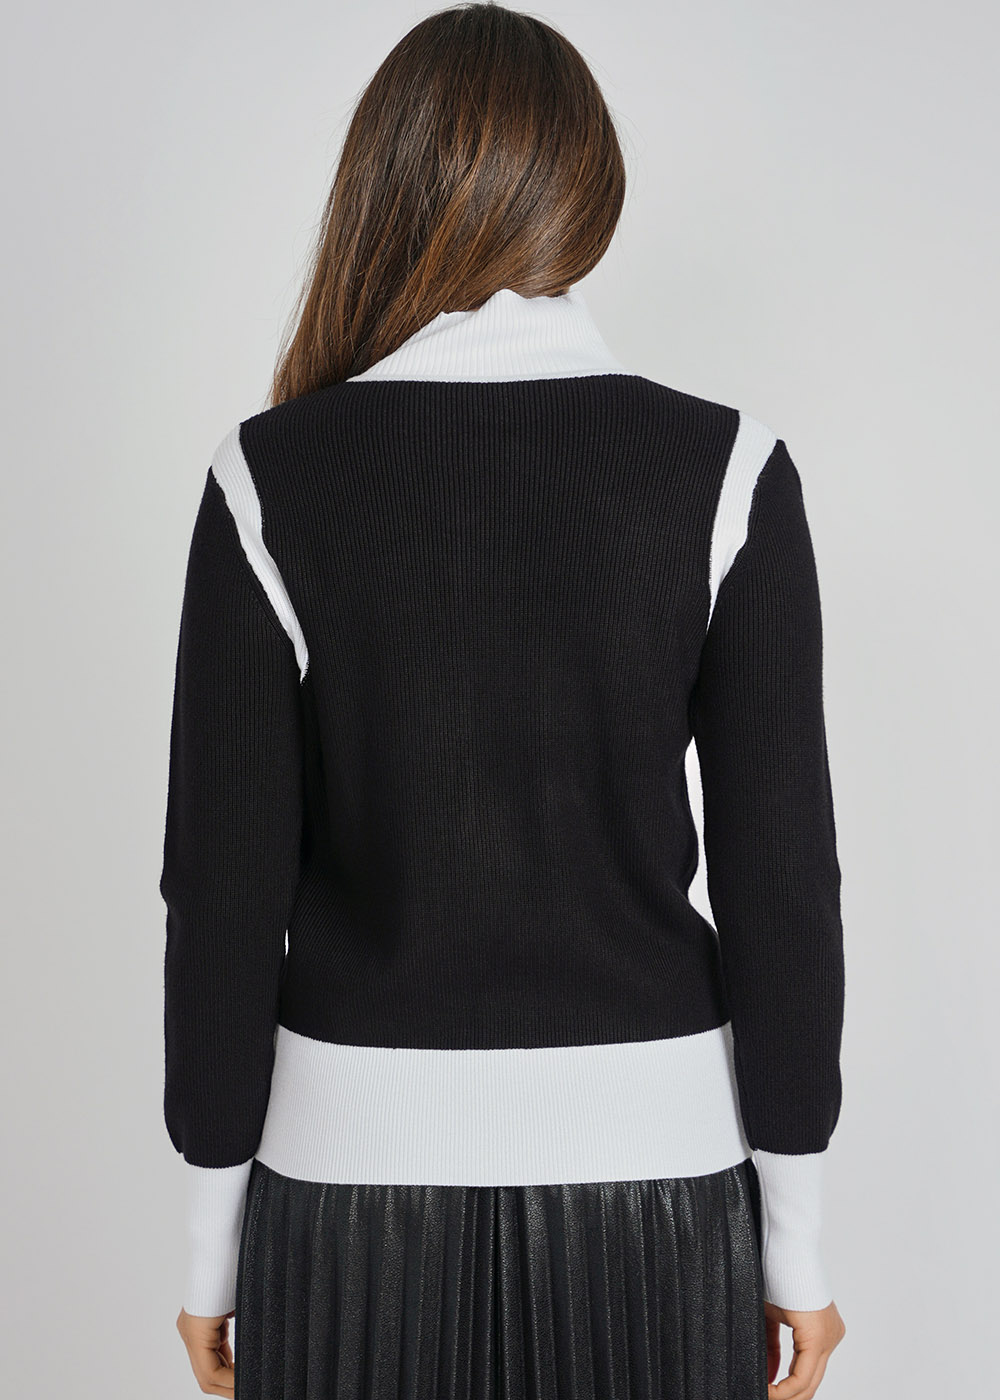 Classic Contrast: Black & White High Neck with Ribbed Design